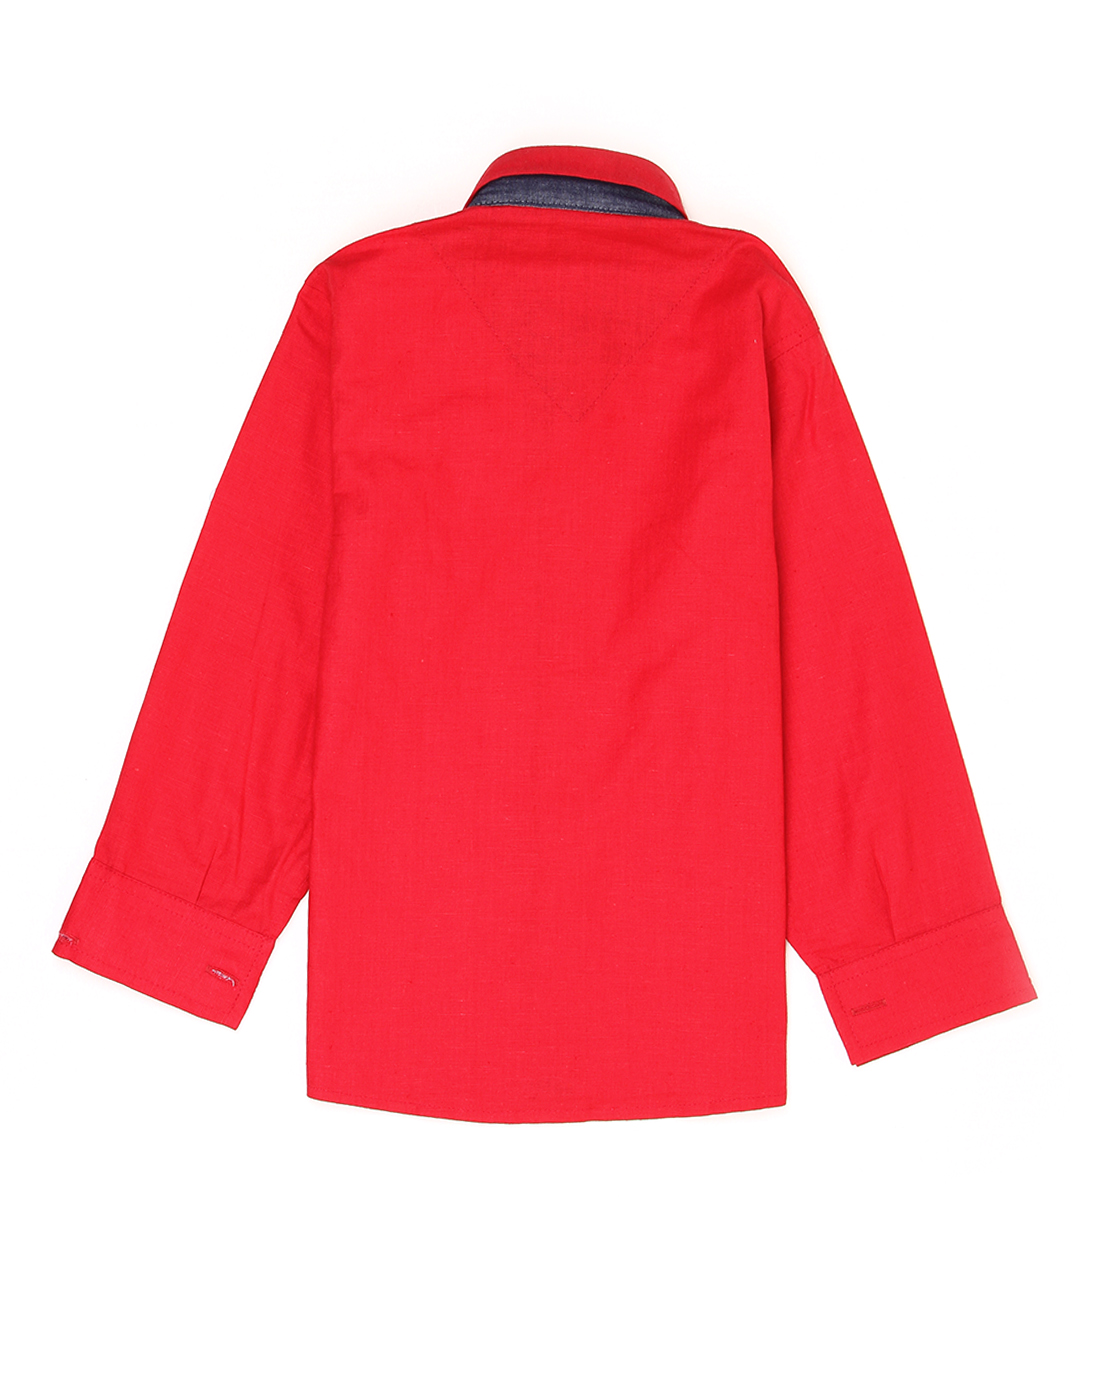 Actuel Infant Casual Wear Red Shirt